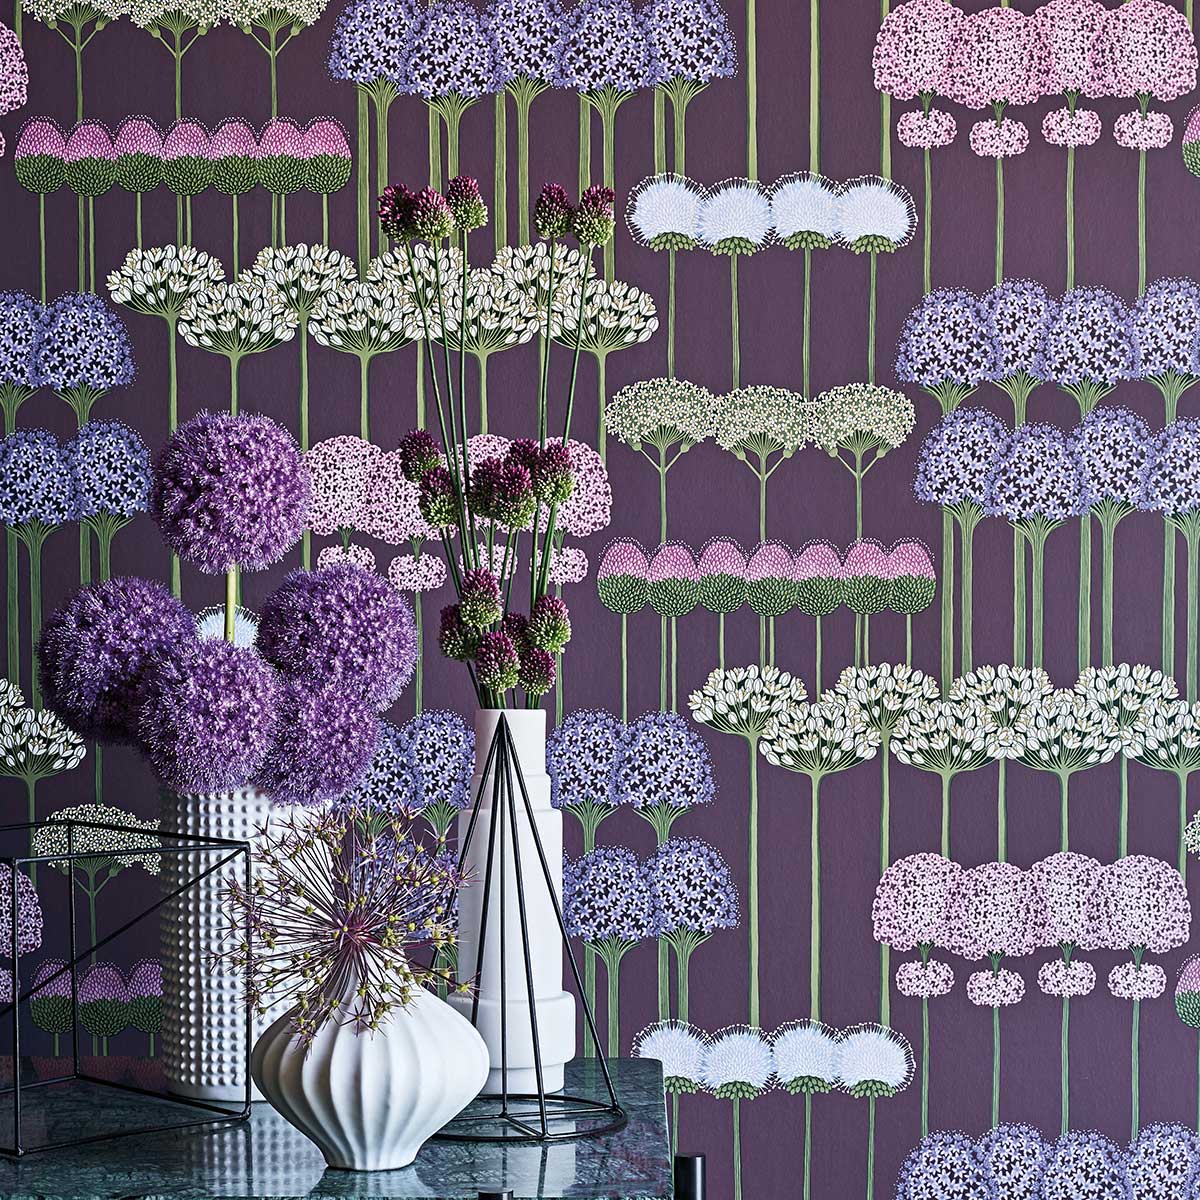 Allium Wallpaper - Mulberry / Heather / Violet - by Cole & Son